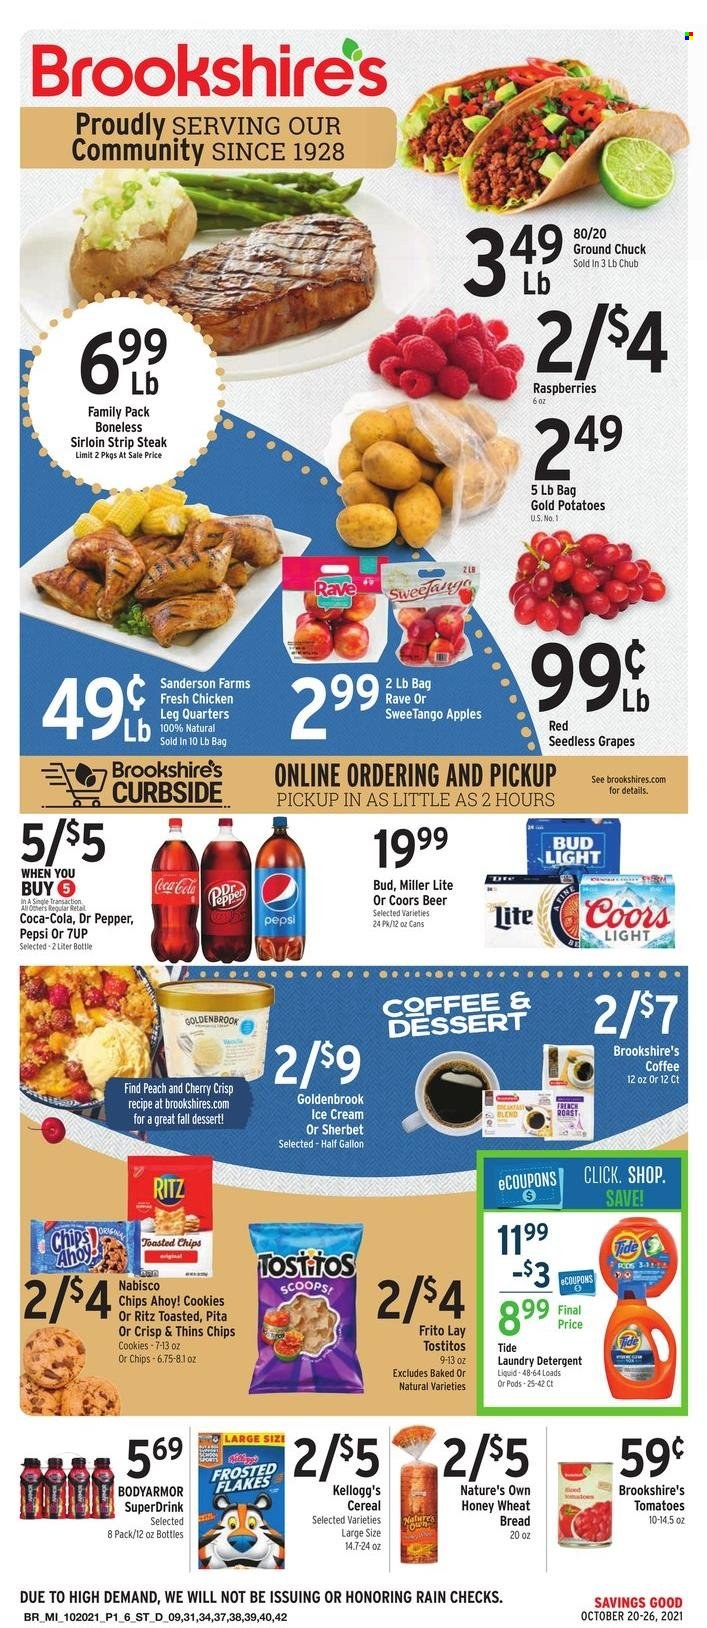 thumbnail - Brookshires Flyer - 10/20/2021 - 10/26/2021 - Sales products - seedless grapes, wheat bread, pita, tomatoes, potatoes, apples, grapes, cherries, ice cream, cookies, Kellogg's, Chips Ahoy!, RITZ, chips, Thins, Tostitos, cereals, Frosted Flakes, Coca-Cola, Pepsi, Dr. Pepper, 7UP, coffee, beer, Bud Light, chicken legs, beef meat, ground chuck, steak, striploin steak, detergent, Tide, laundry detergent, Nature's Own, Miller Lite, Coors. Page 1.